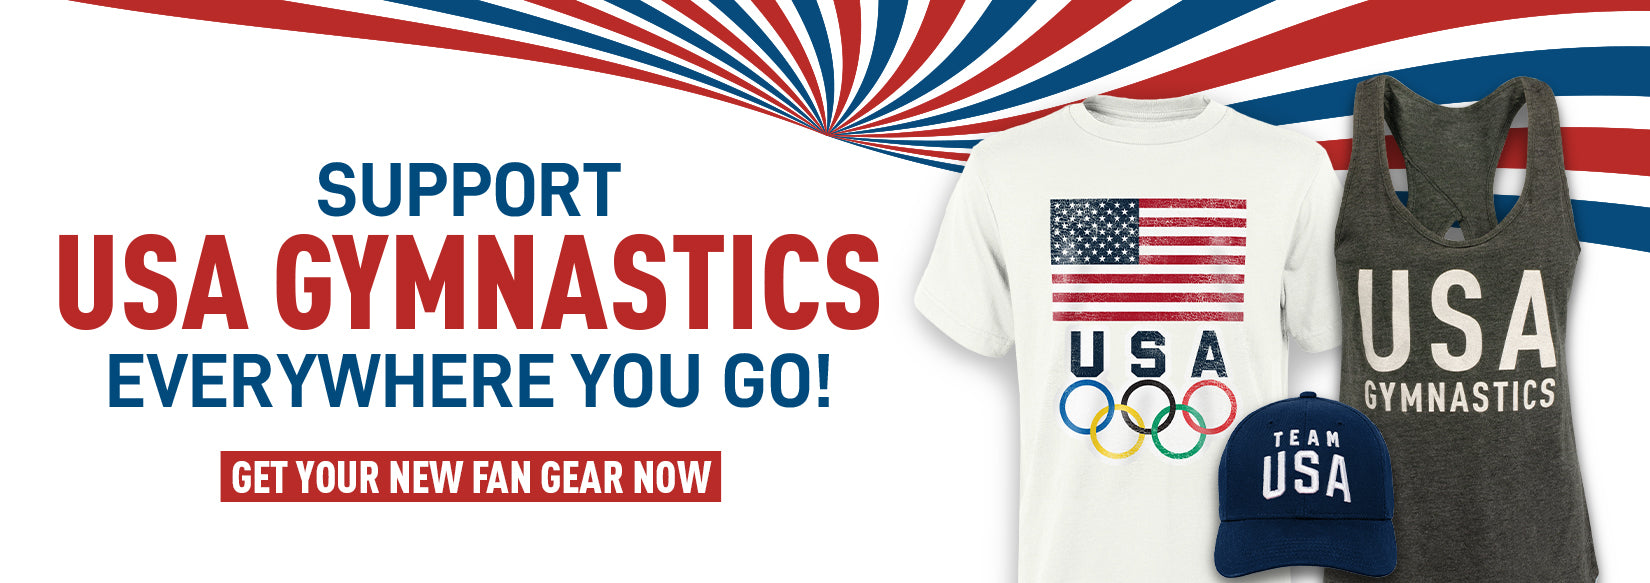 Support USA Gymnastics everywhere you go! Get your new fan gear now.